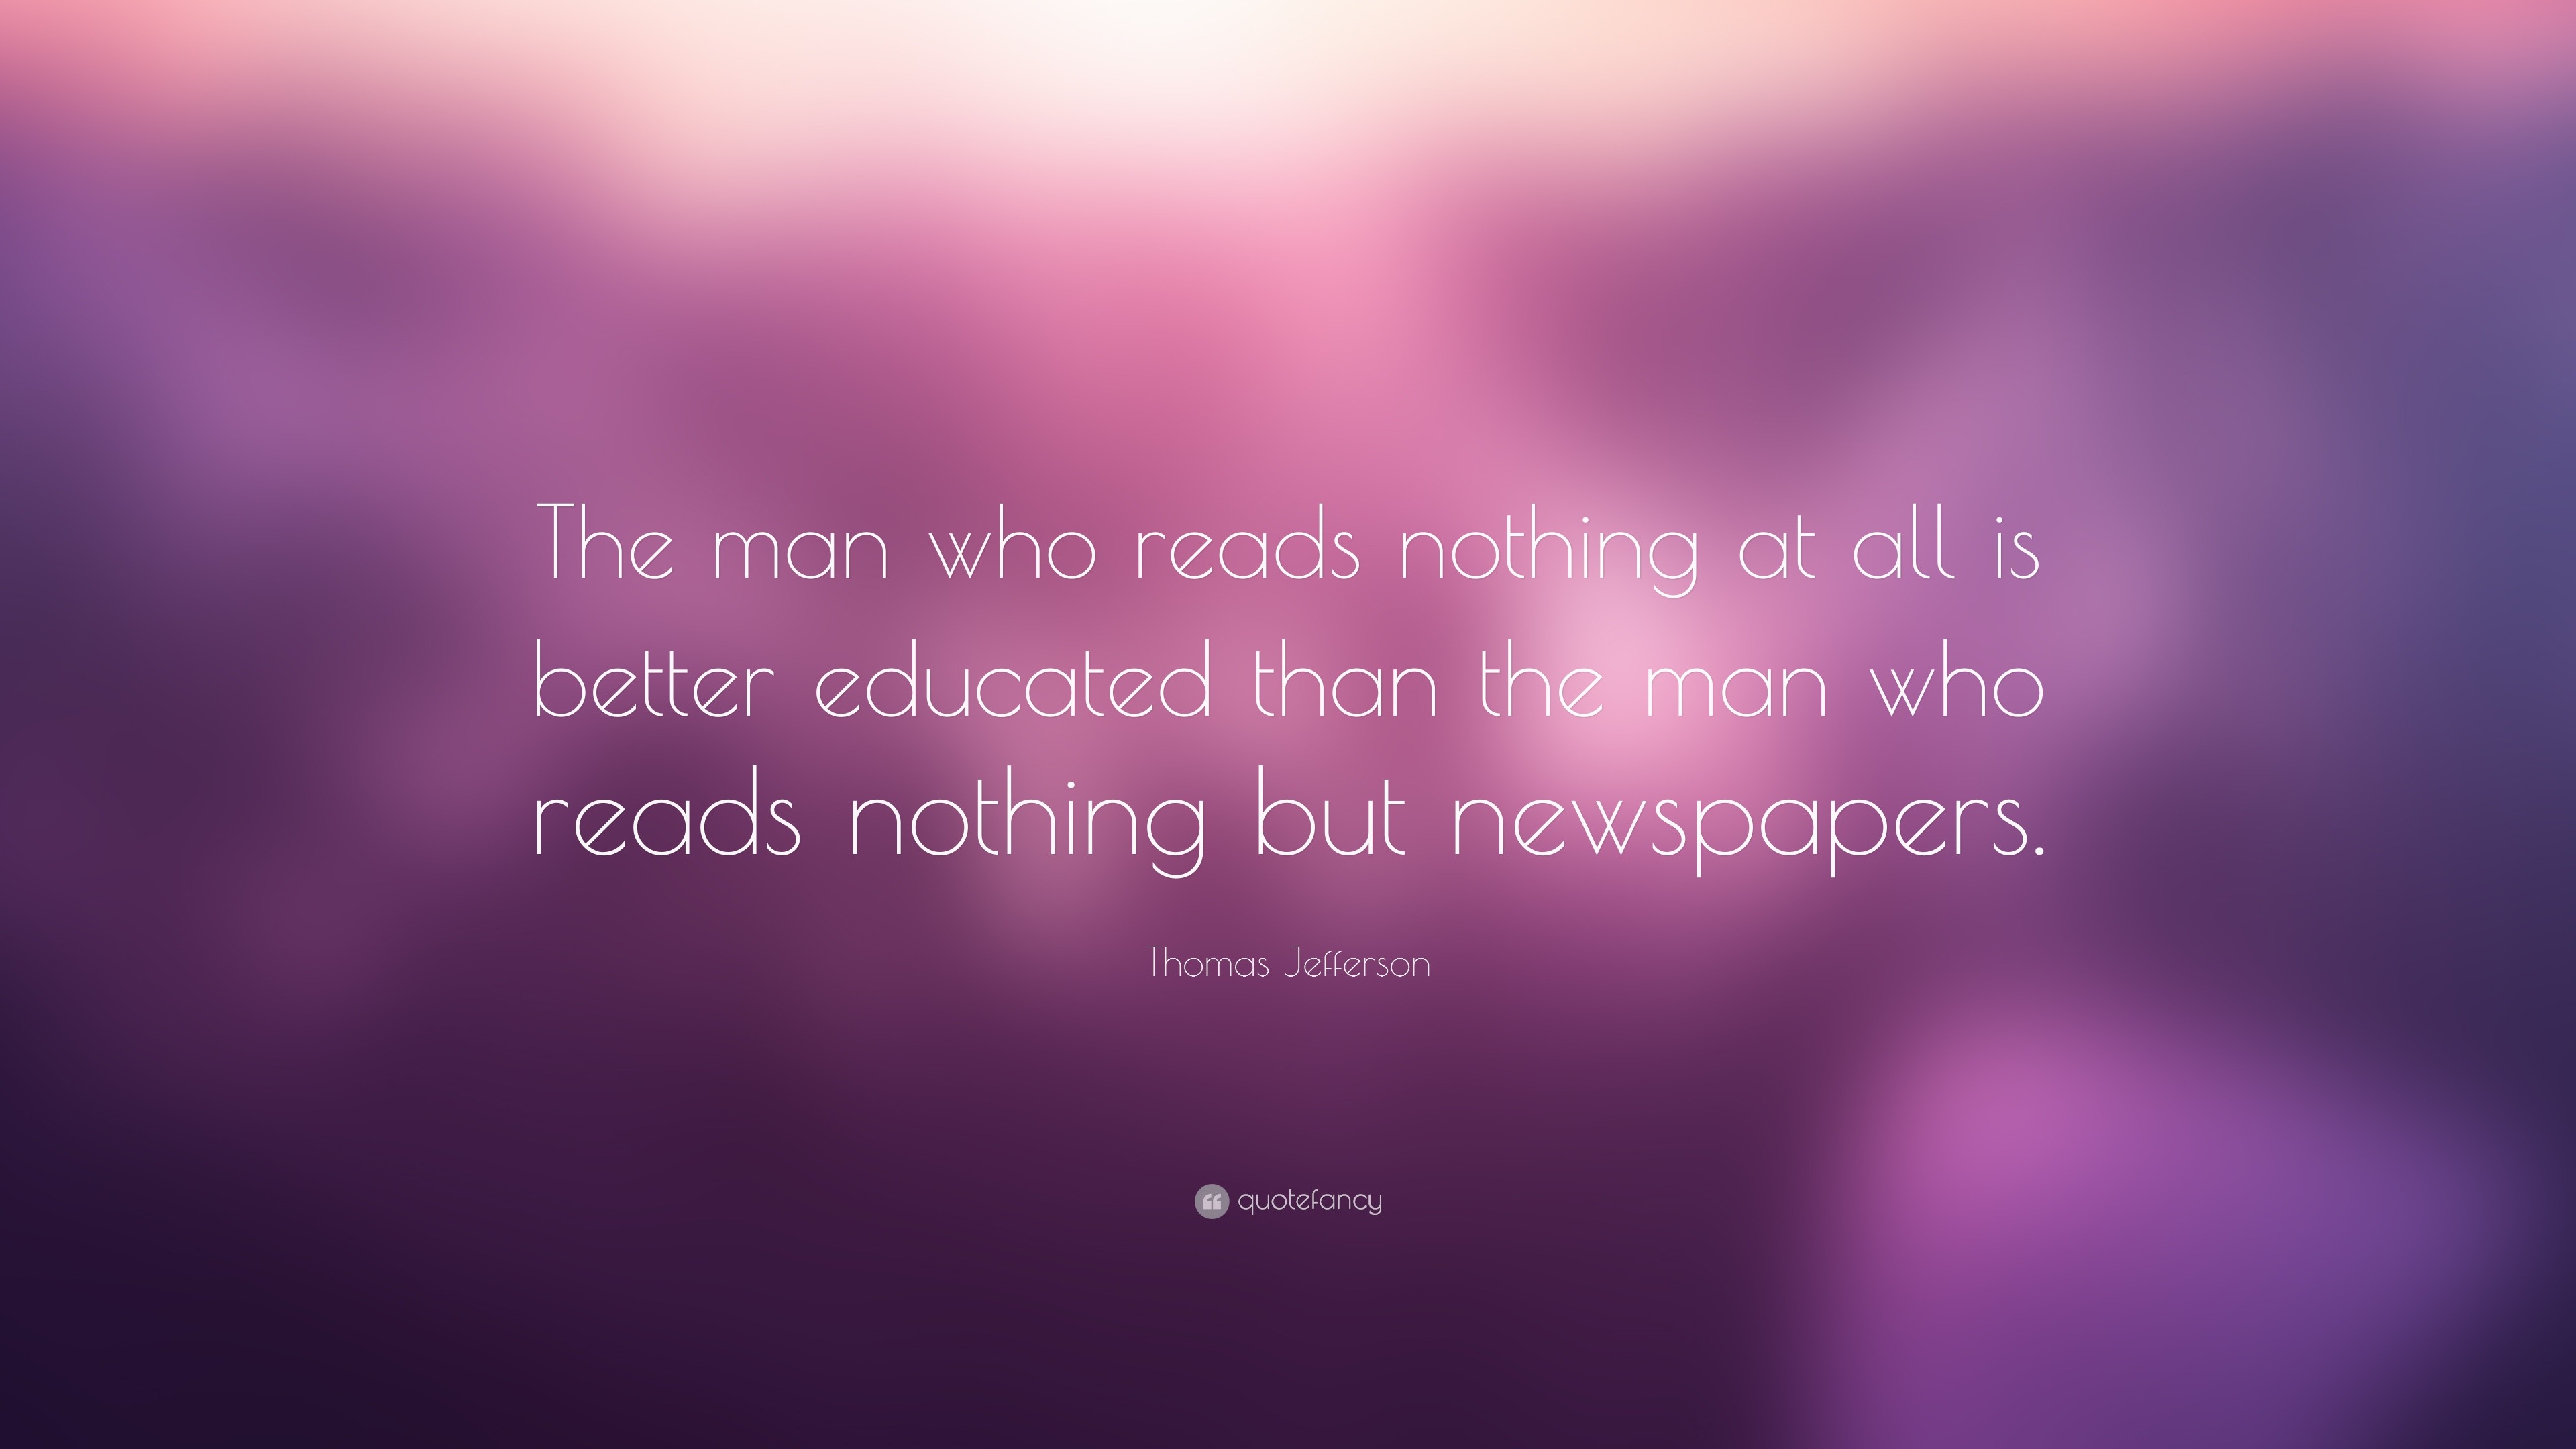 Thomas Jefferson Quote: “The man who reads nothing at all is better ...